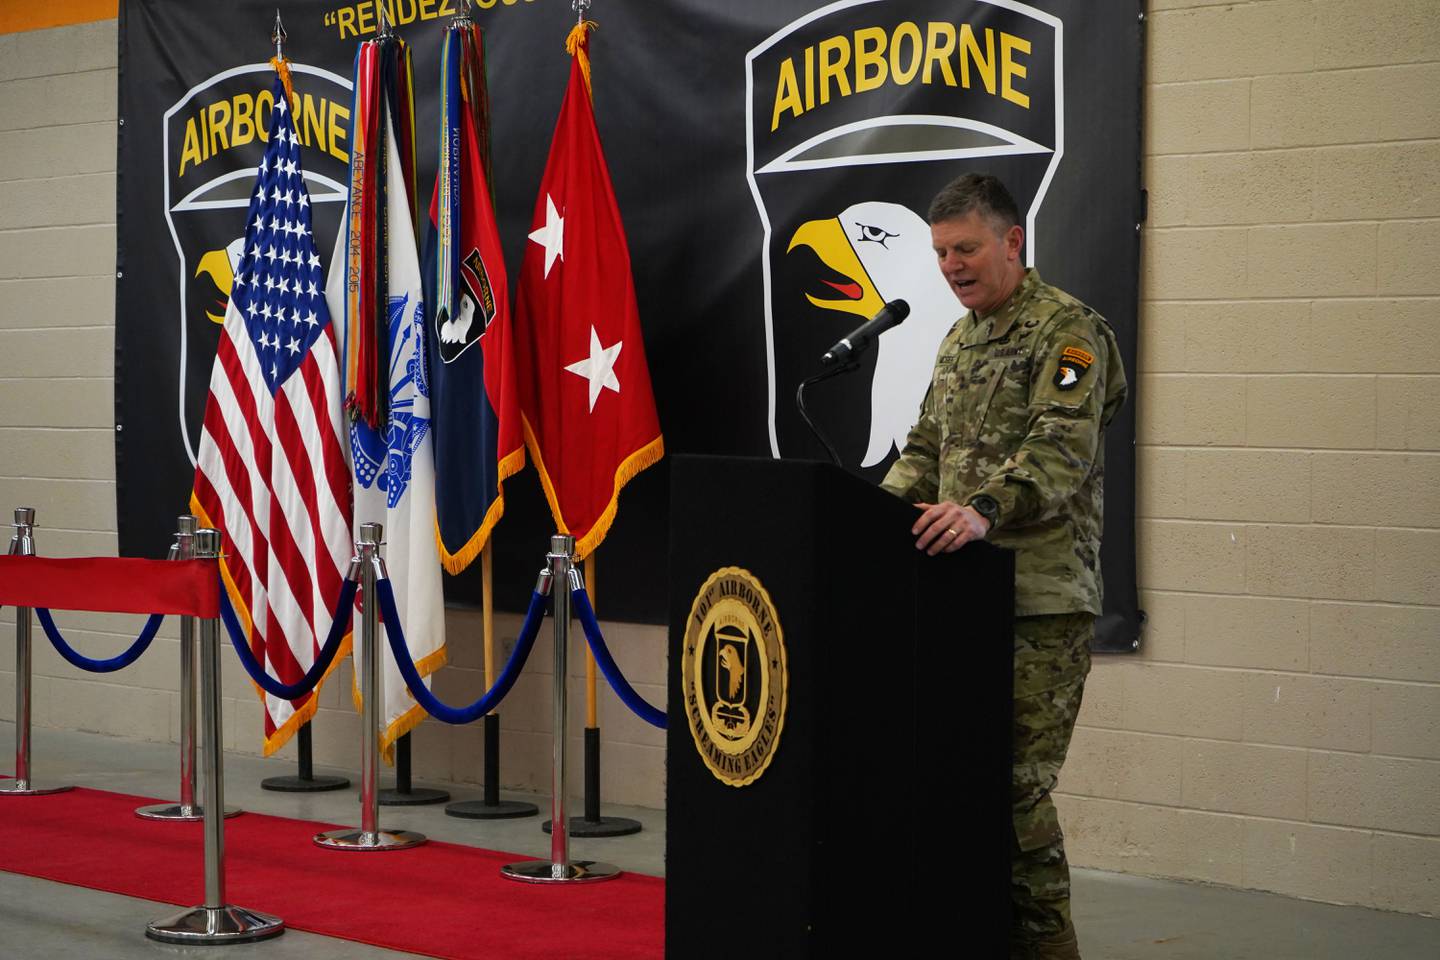 U.S. Army Maj. Gen. JP McGee gives a speech during the grand opening ceremony for the EagleWerx Applied Tactical Innovation Center at Fort Campbell, Kentucky, in December 2021.